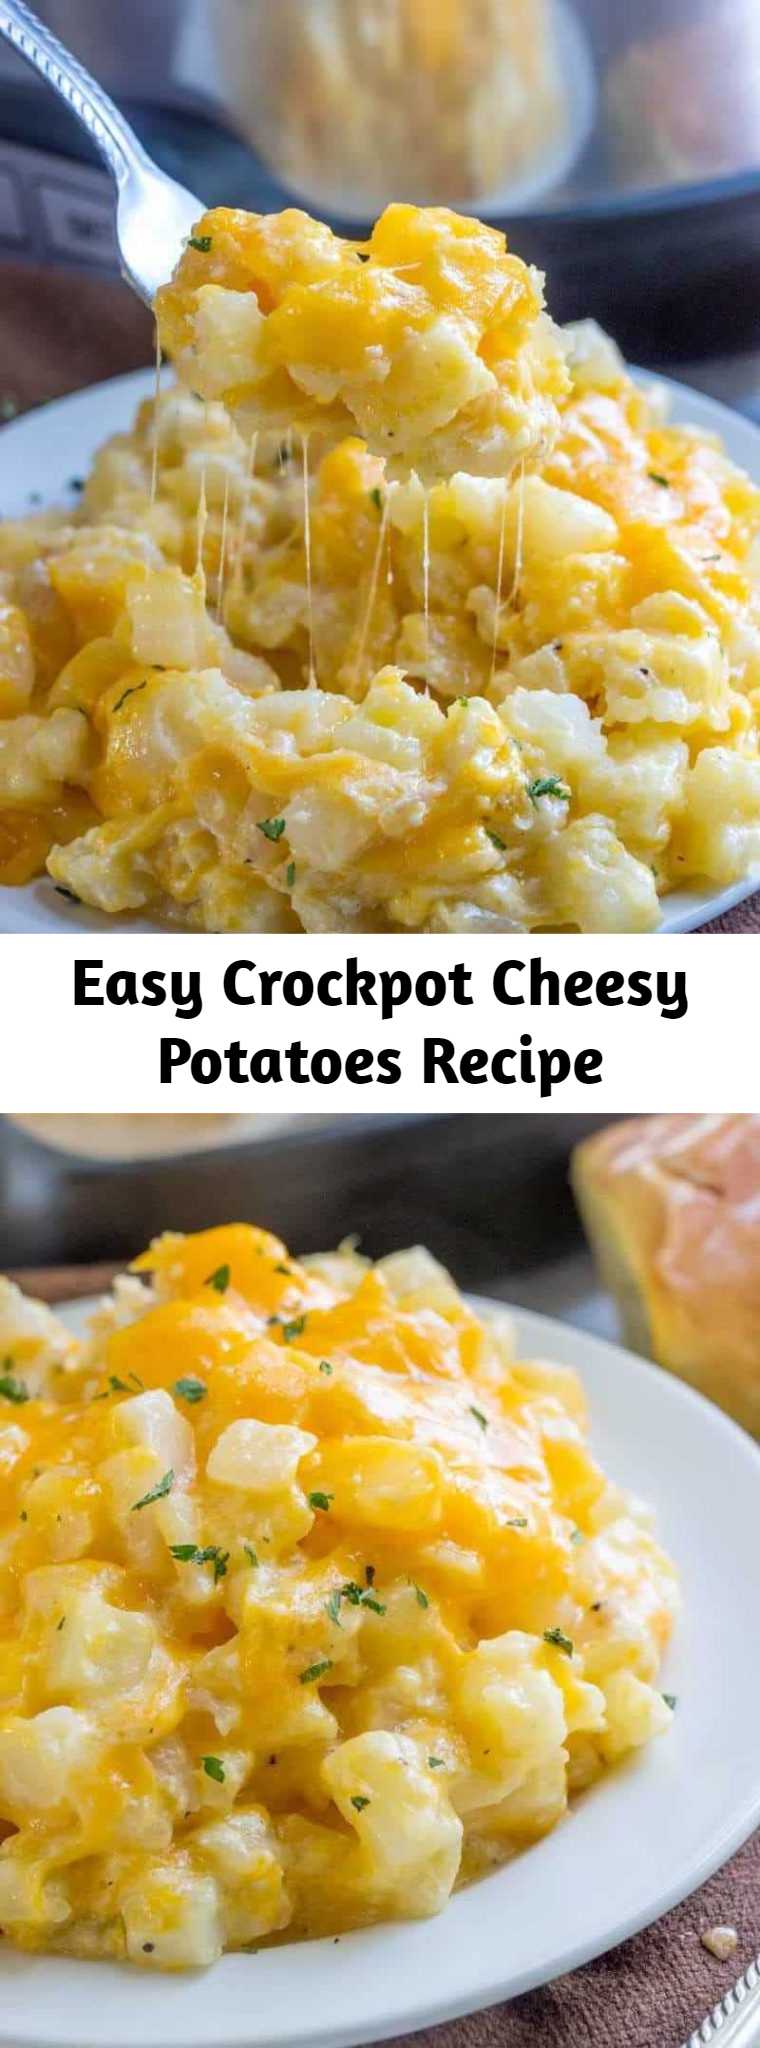 Easy Crockpot Cheesy Potatoes Recipe - Easy, cheesy and a family favorite these Crockpot Cheesy Potatoes are a no-fail recipe that is perfect for dinnertime, potlucks or when you're in a hurry and want to fix it and forget it.